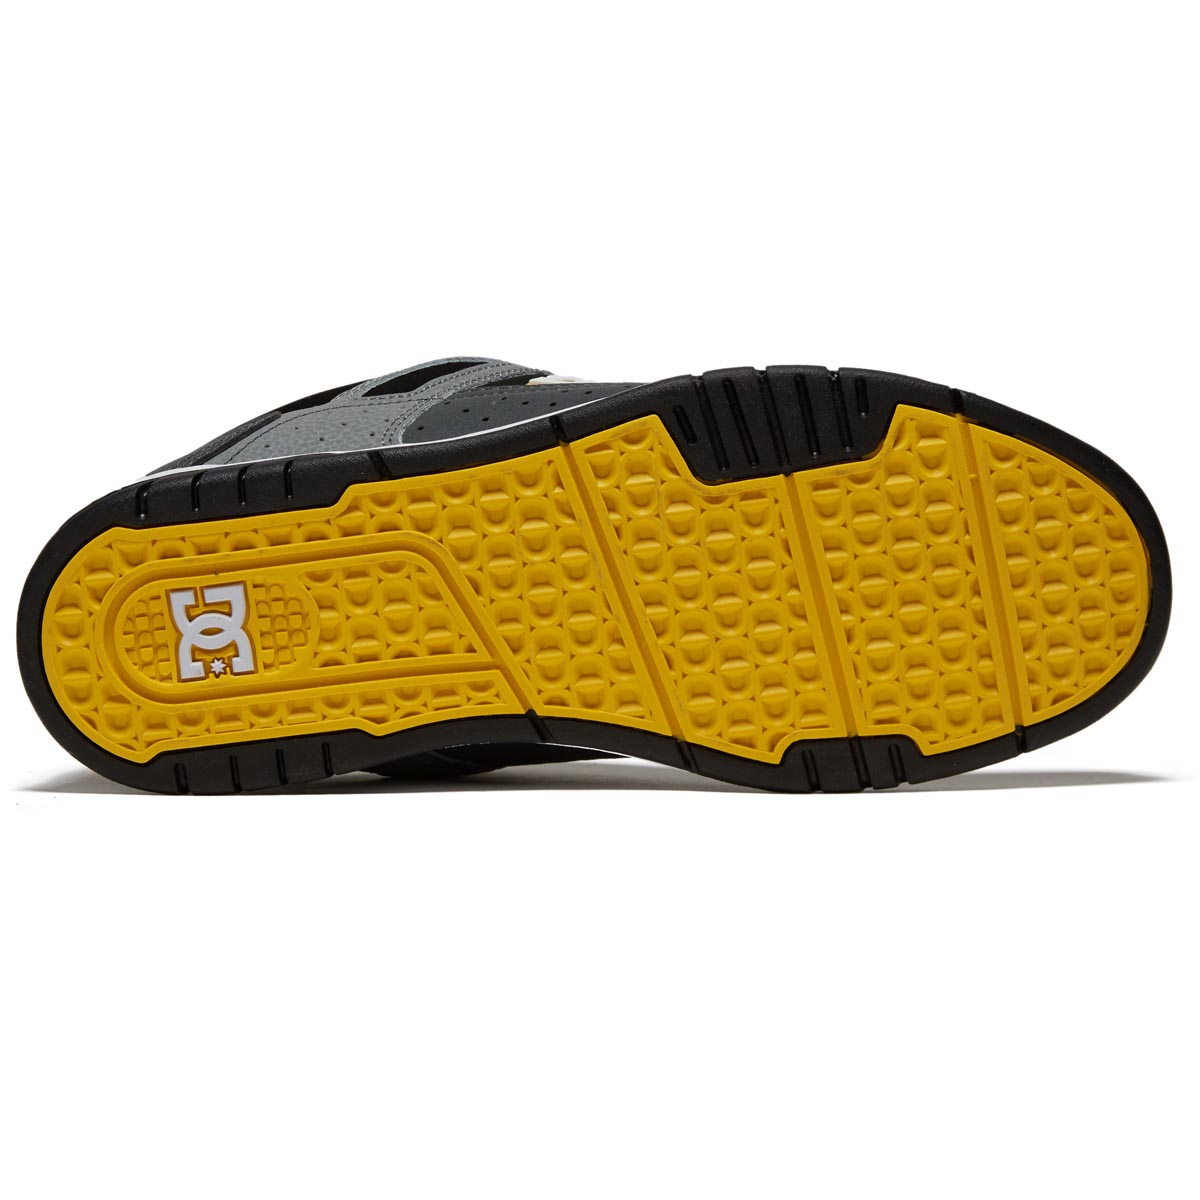 DC Stag Shoes - Grey/Yellow image 4